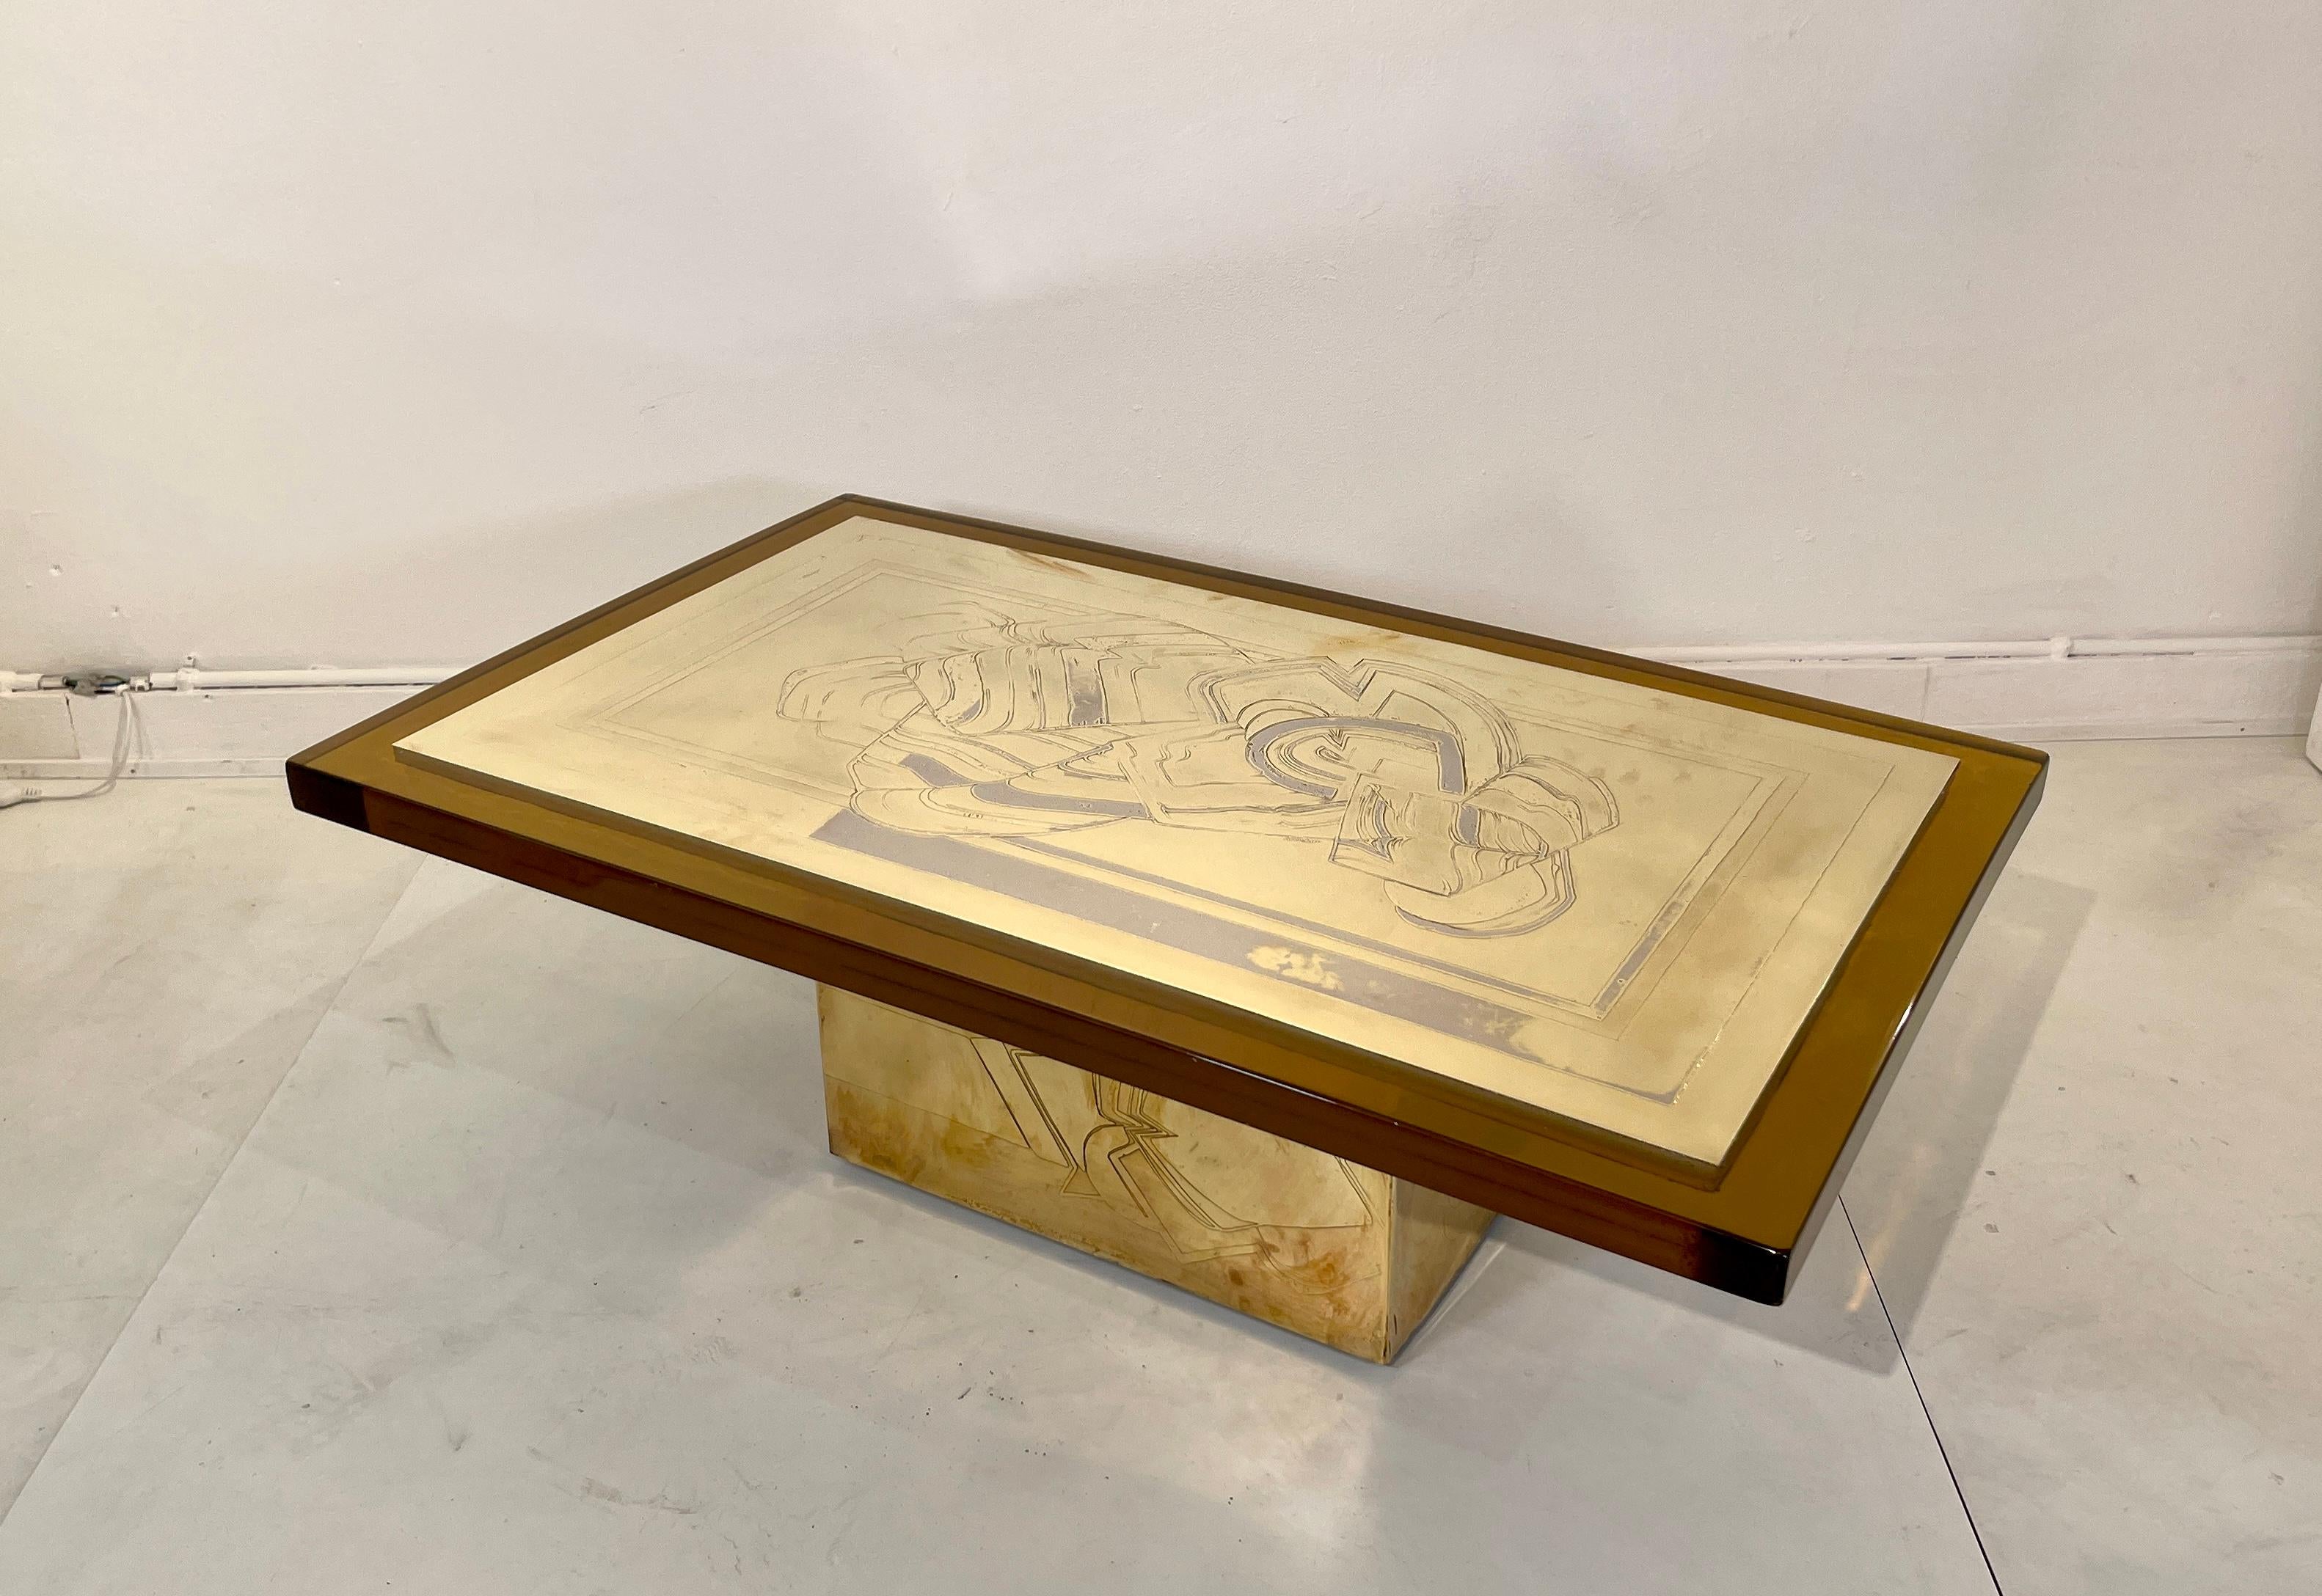 Rare and beautiful coffee table by Armand Jonckers. Etched brass (double patin (brass and silver) )  and resin in very good and original condition. the feet also has an acid-etched decor. Signed Armand.